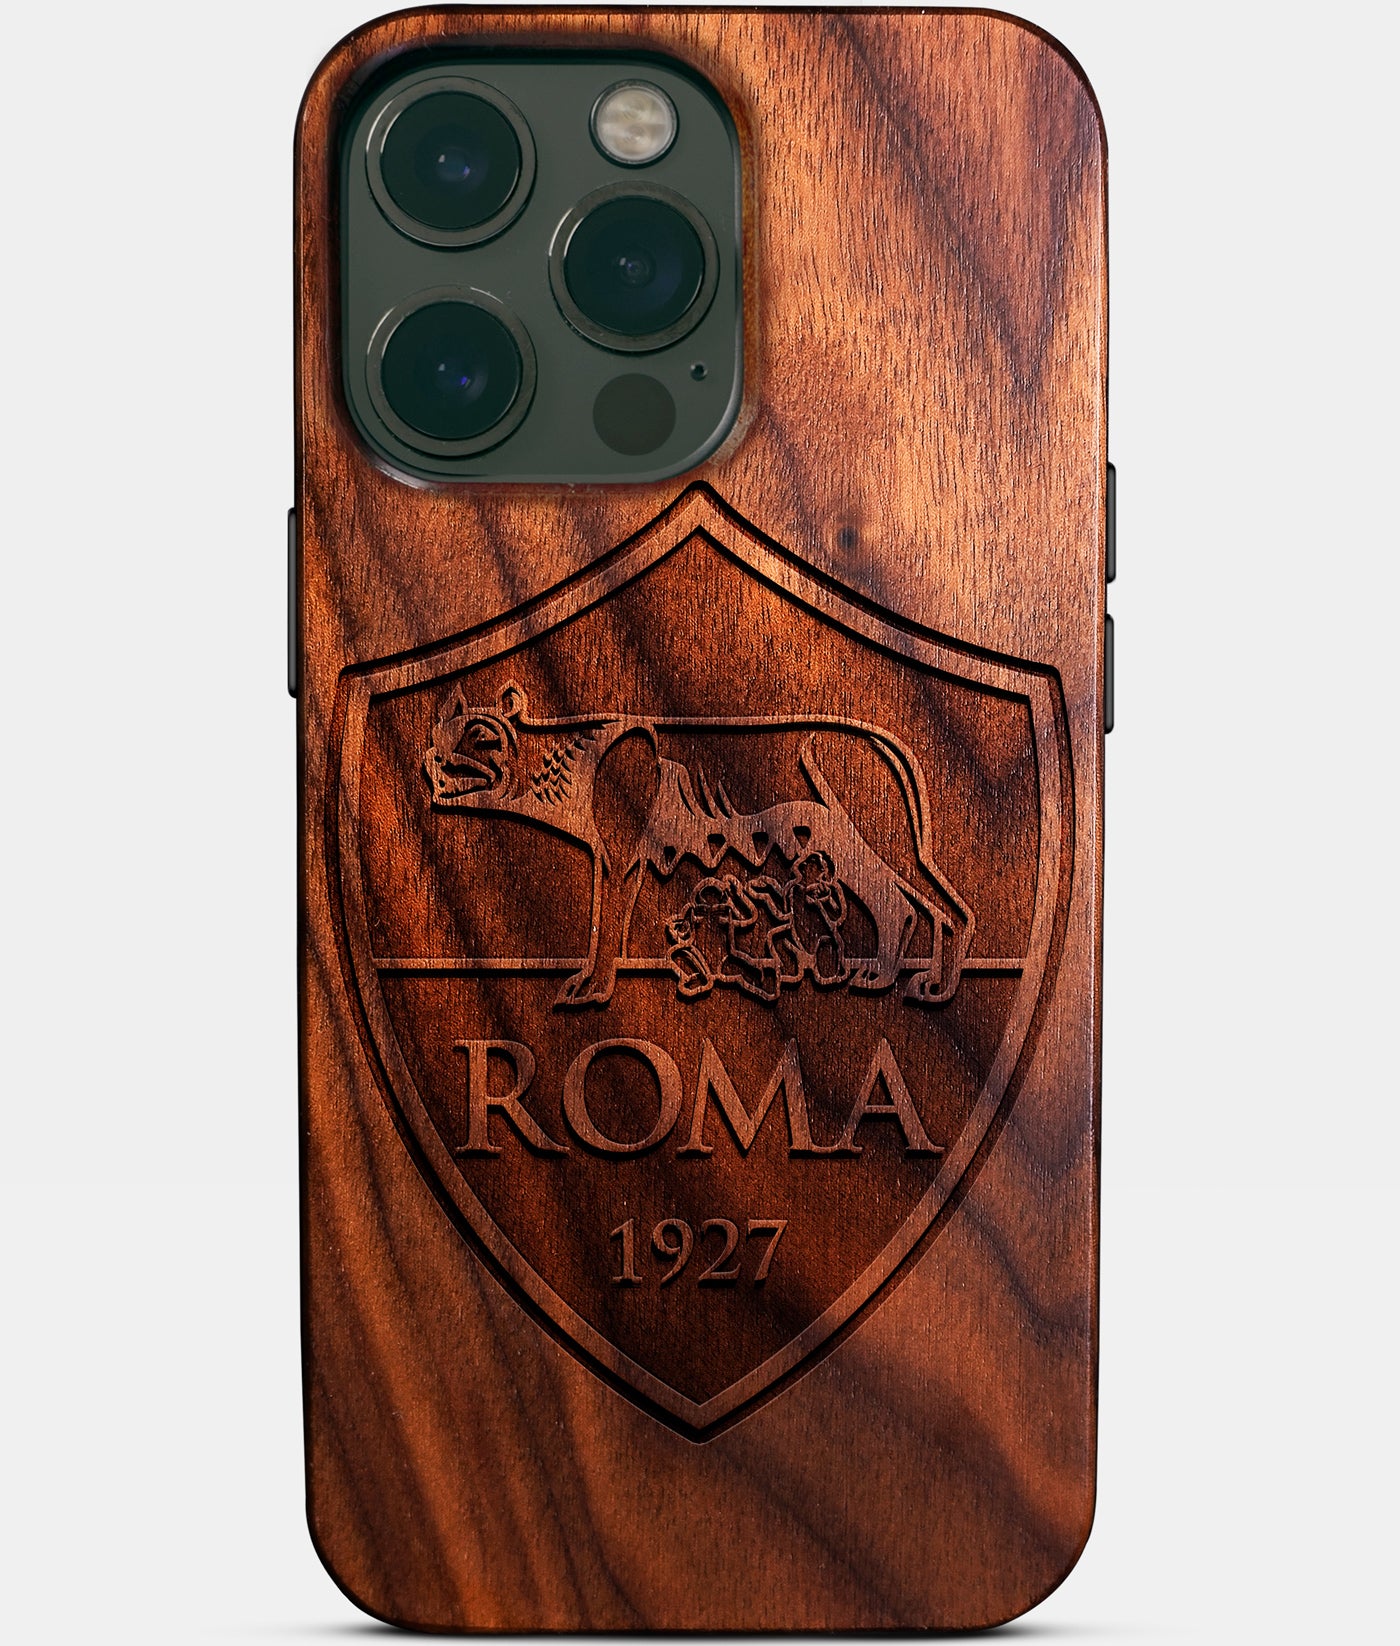 Custom A.S. Roma iPhone 14/14 Pro/14 Pro Max/14 Plus Case - Carved Wood A.S. Roma Cover - Eco-friendly AS Roma iPhone 14 Case - Custom AS Roma Gift For Him - Monogrammed Personalized iPhone 14 Cover By Engraved In Nature